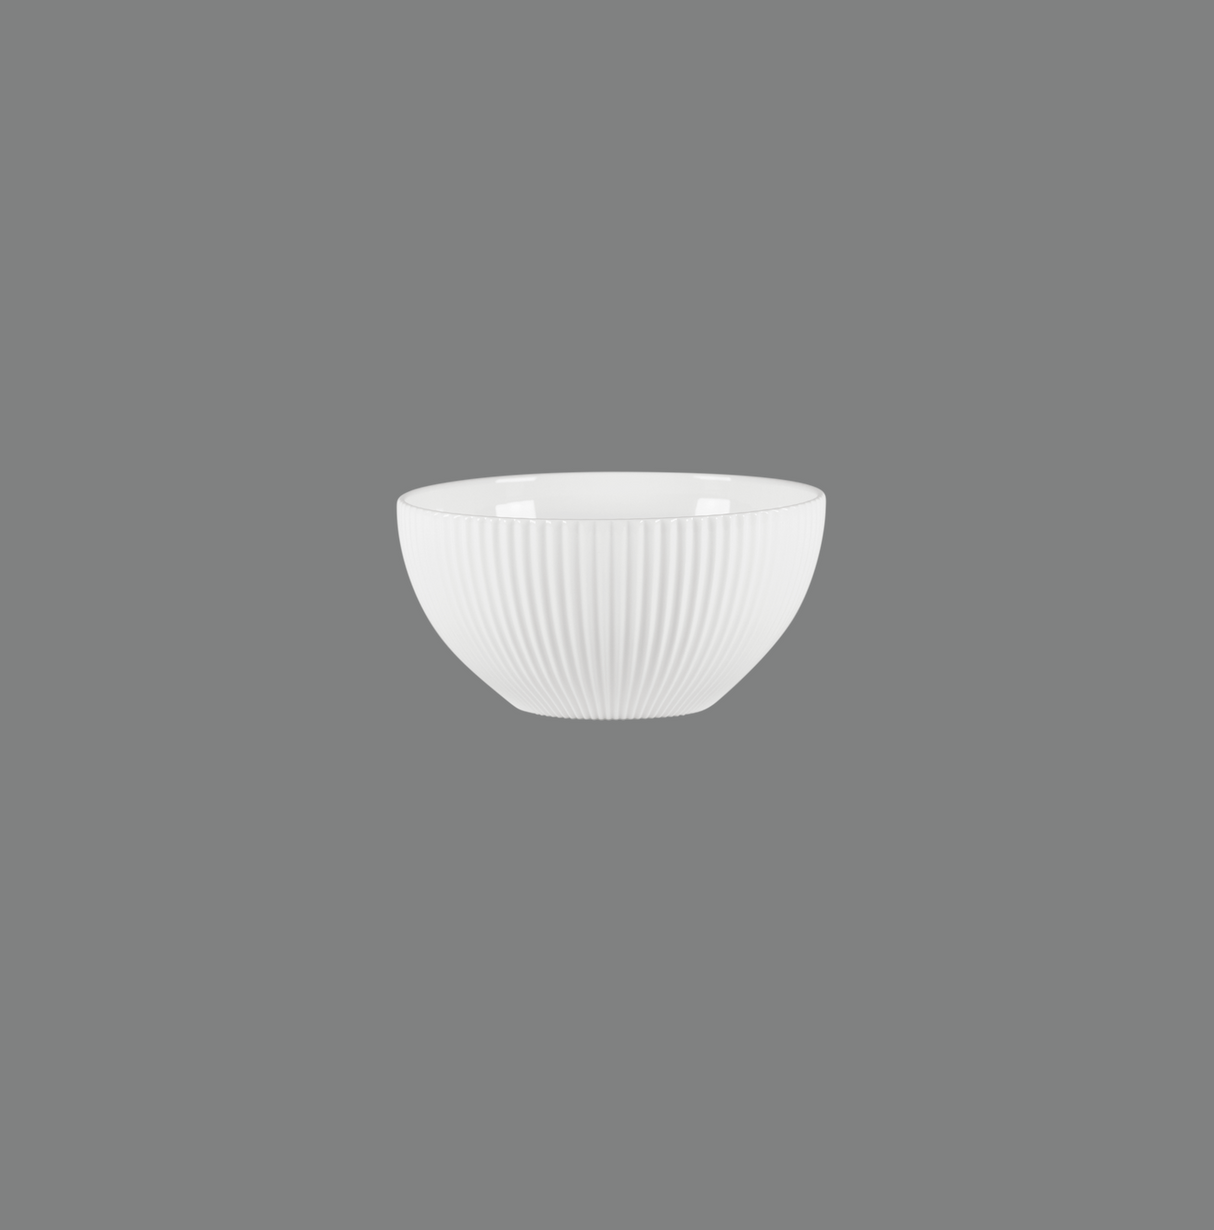 Spectra Round Bowl - 300ml: Pack of 12